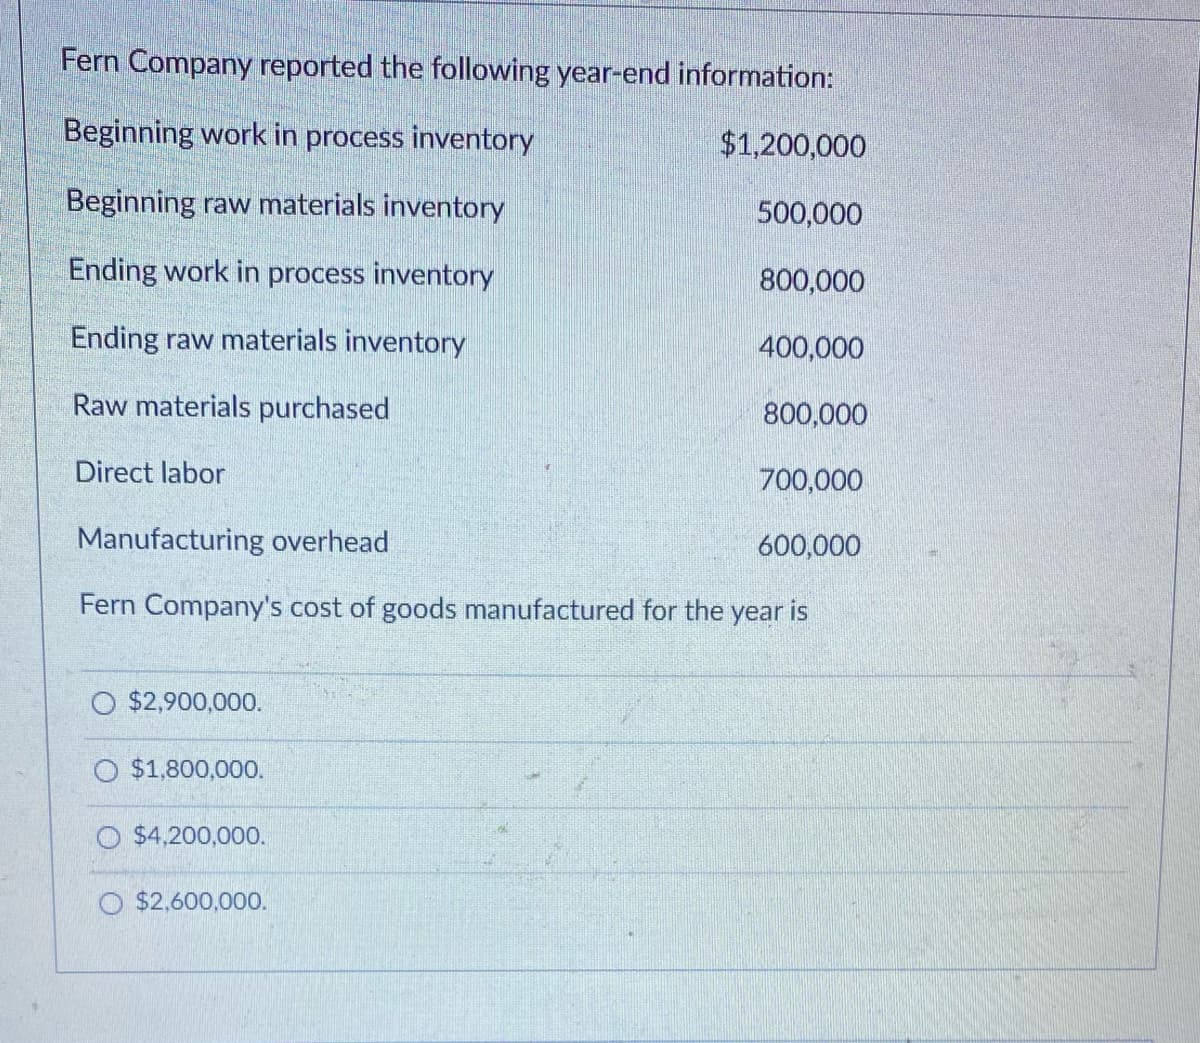 Fern Company reported the following year-end information:
Beginning work in process inventory
$1,200,000
Beginning raw materials inventory
500,000
Ending work in process inventory
800,000
Ending raw materials inventory
400,000
Raw materials purchased
800,000
Direct labor
700,000
Manufacturing overhead
600,000
Fern Company's cost of goods manufactured for the year is
$2,900,000.
O $1,800,000.
O $4,200,000.
$2,600,000.
